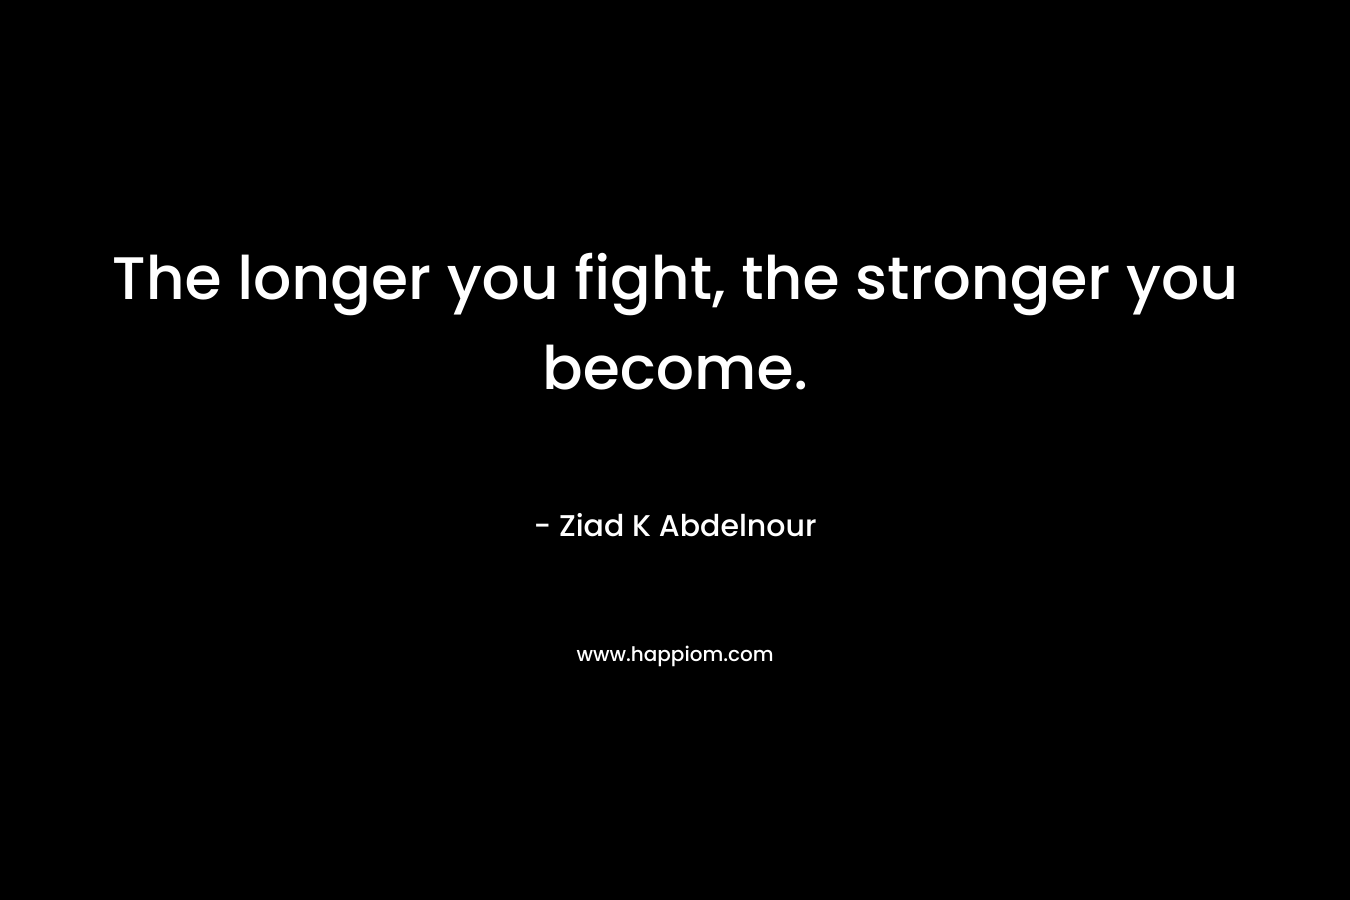 The longer you fight, the stronger you become.